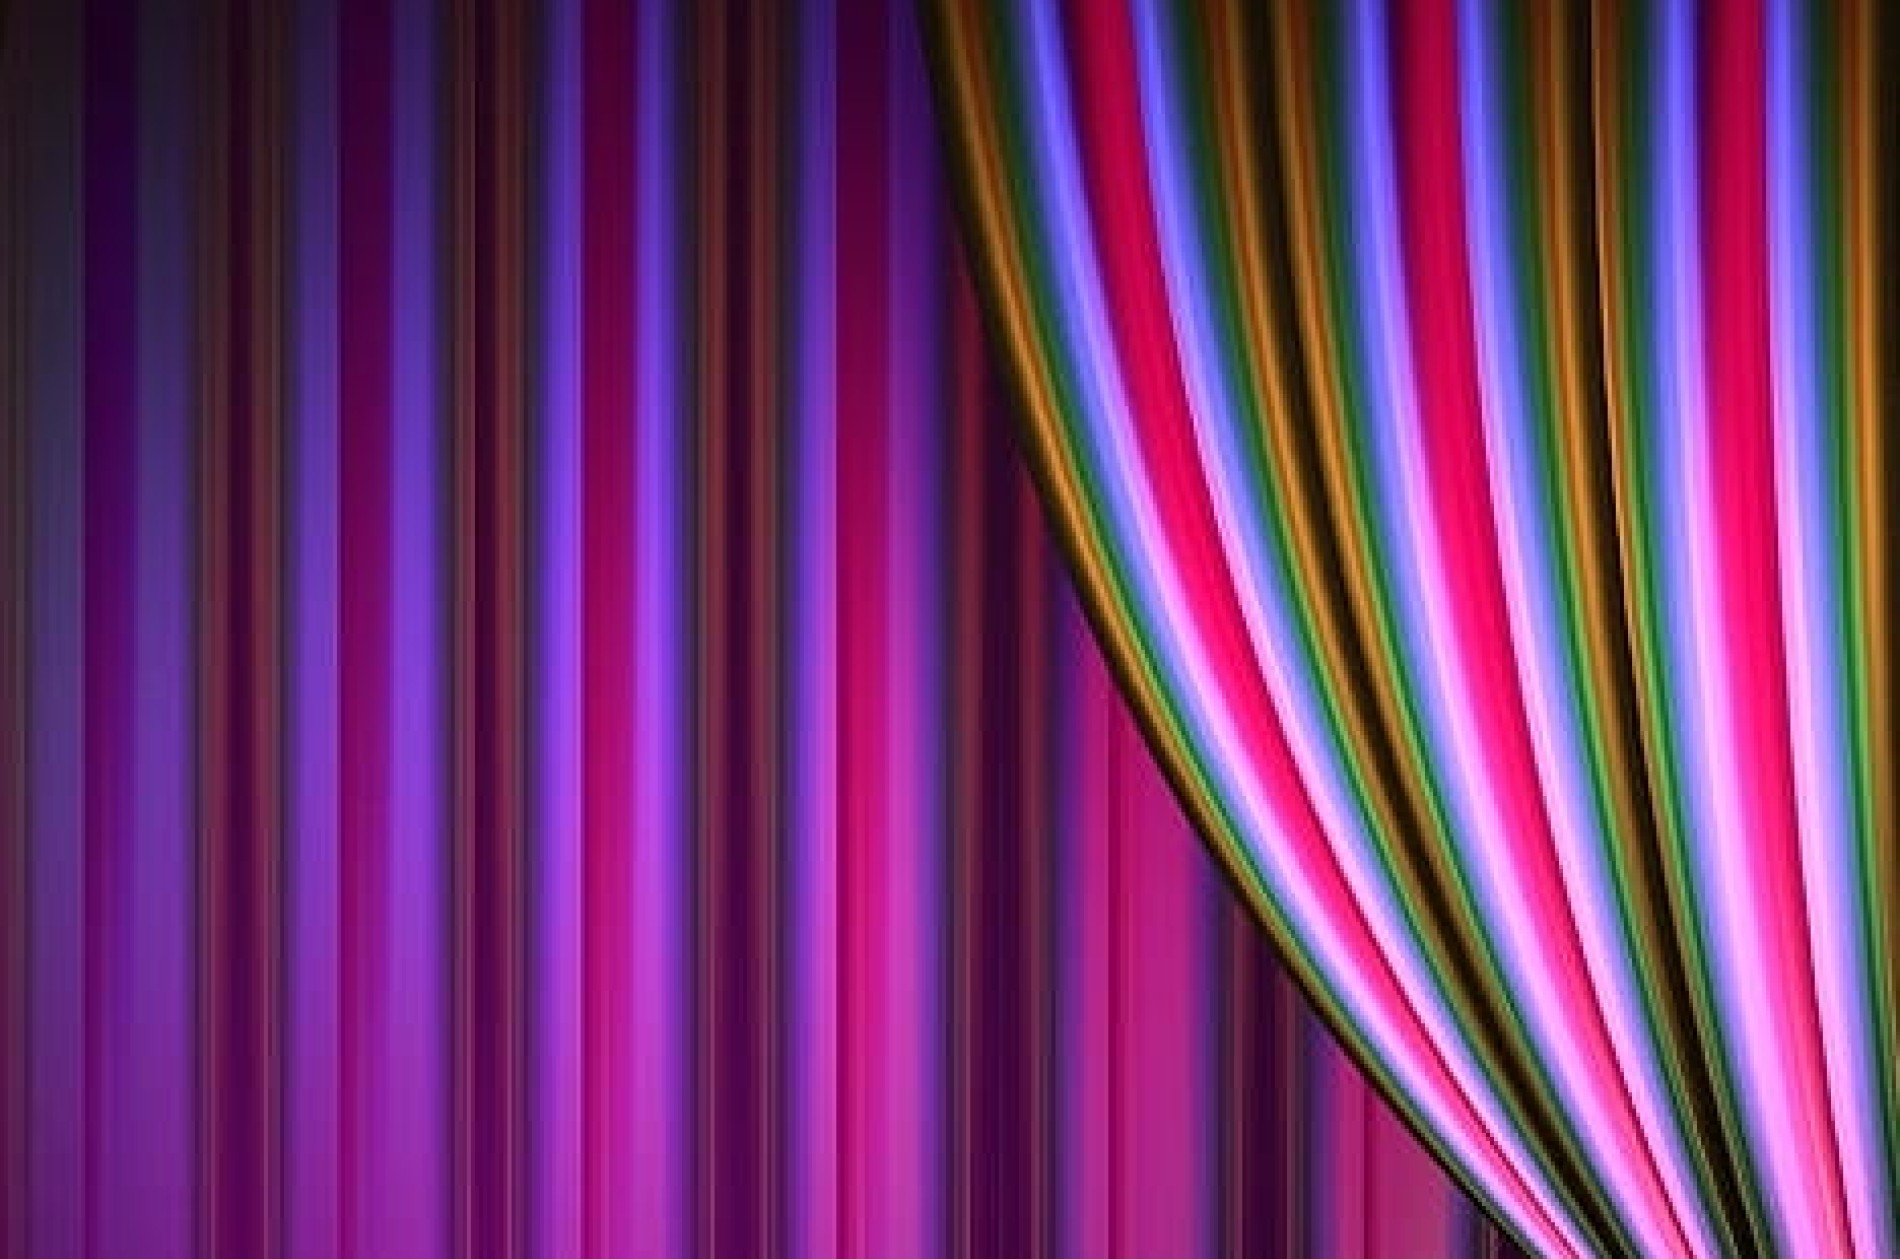 Striped, drawn-back curtain with similar stripe pattern in the background.